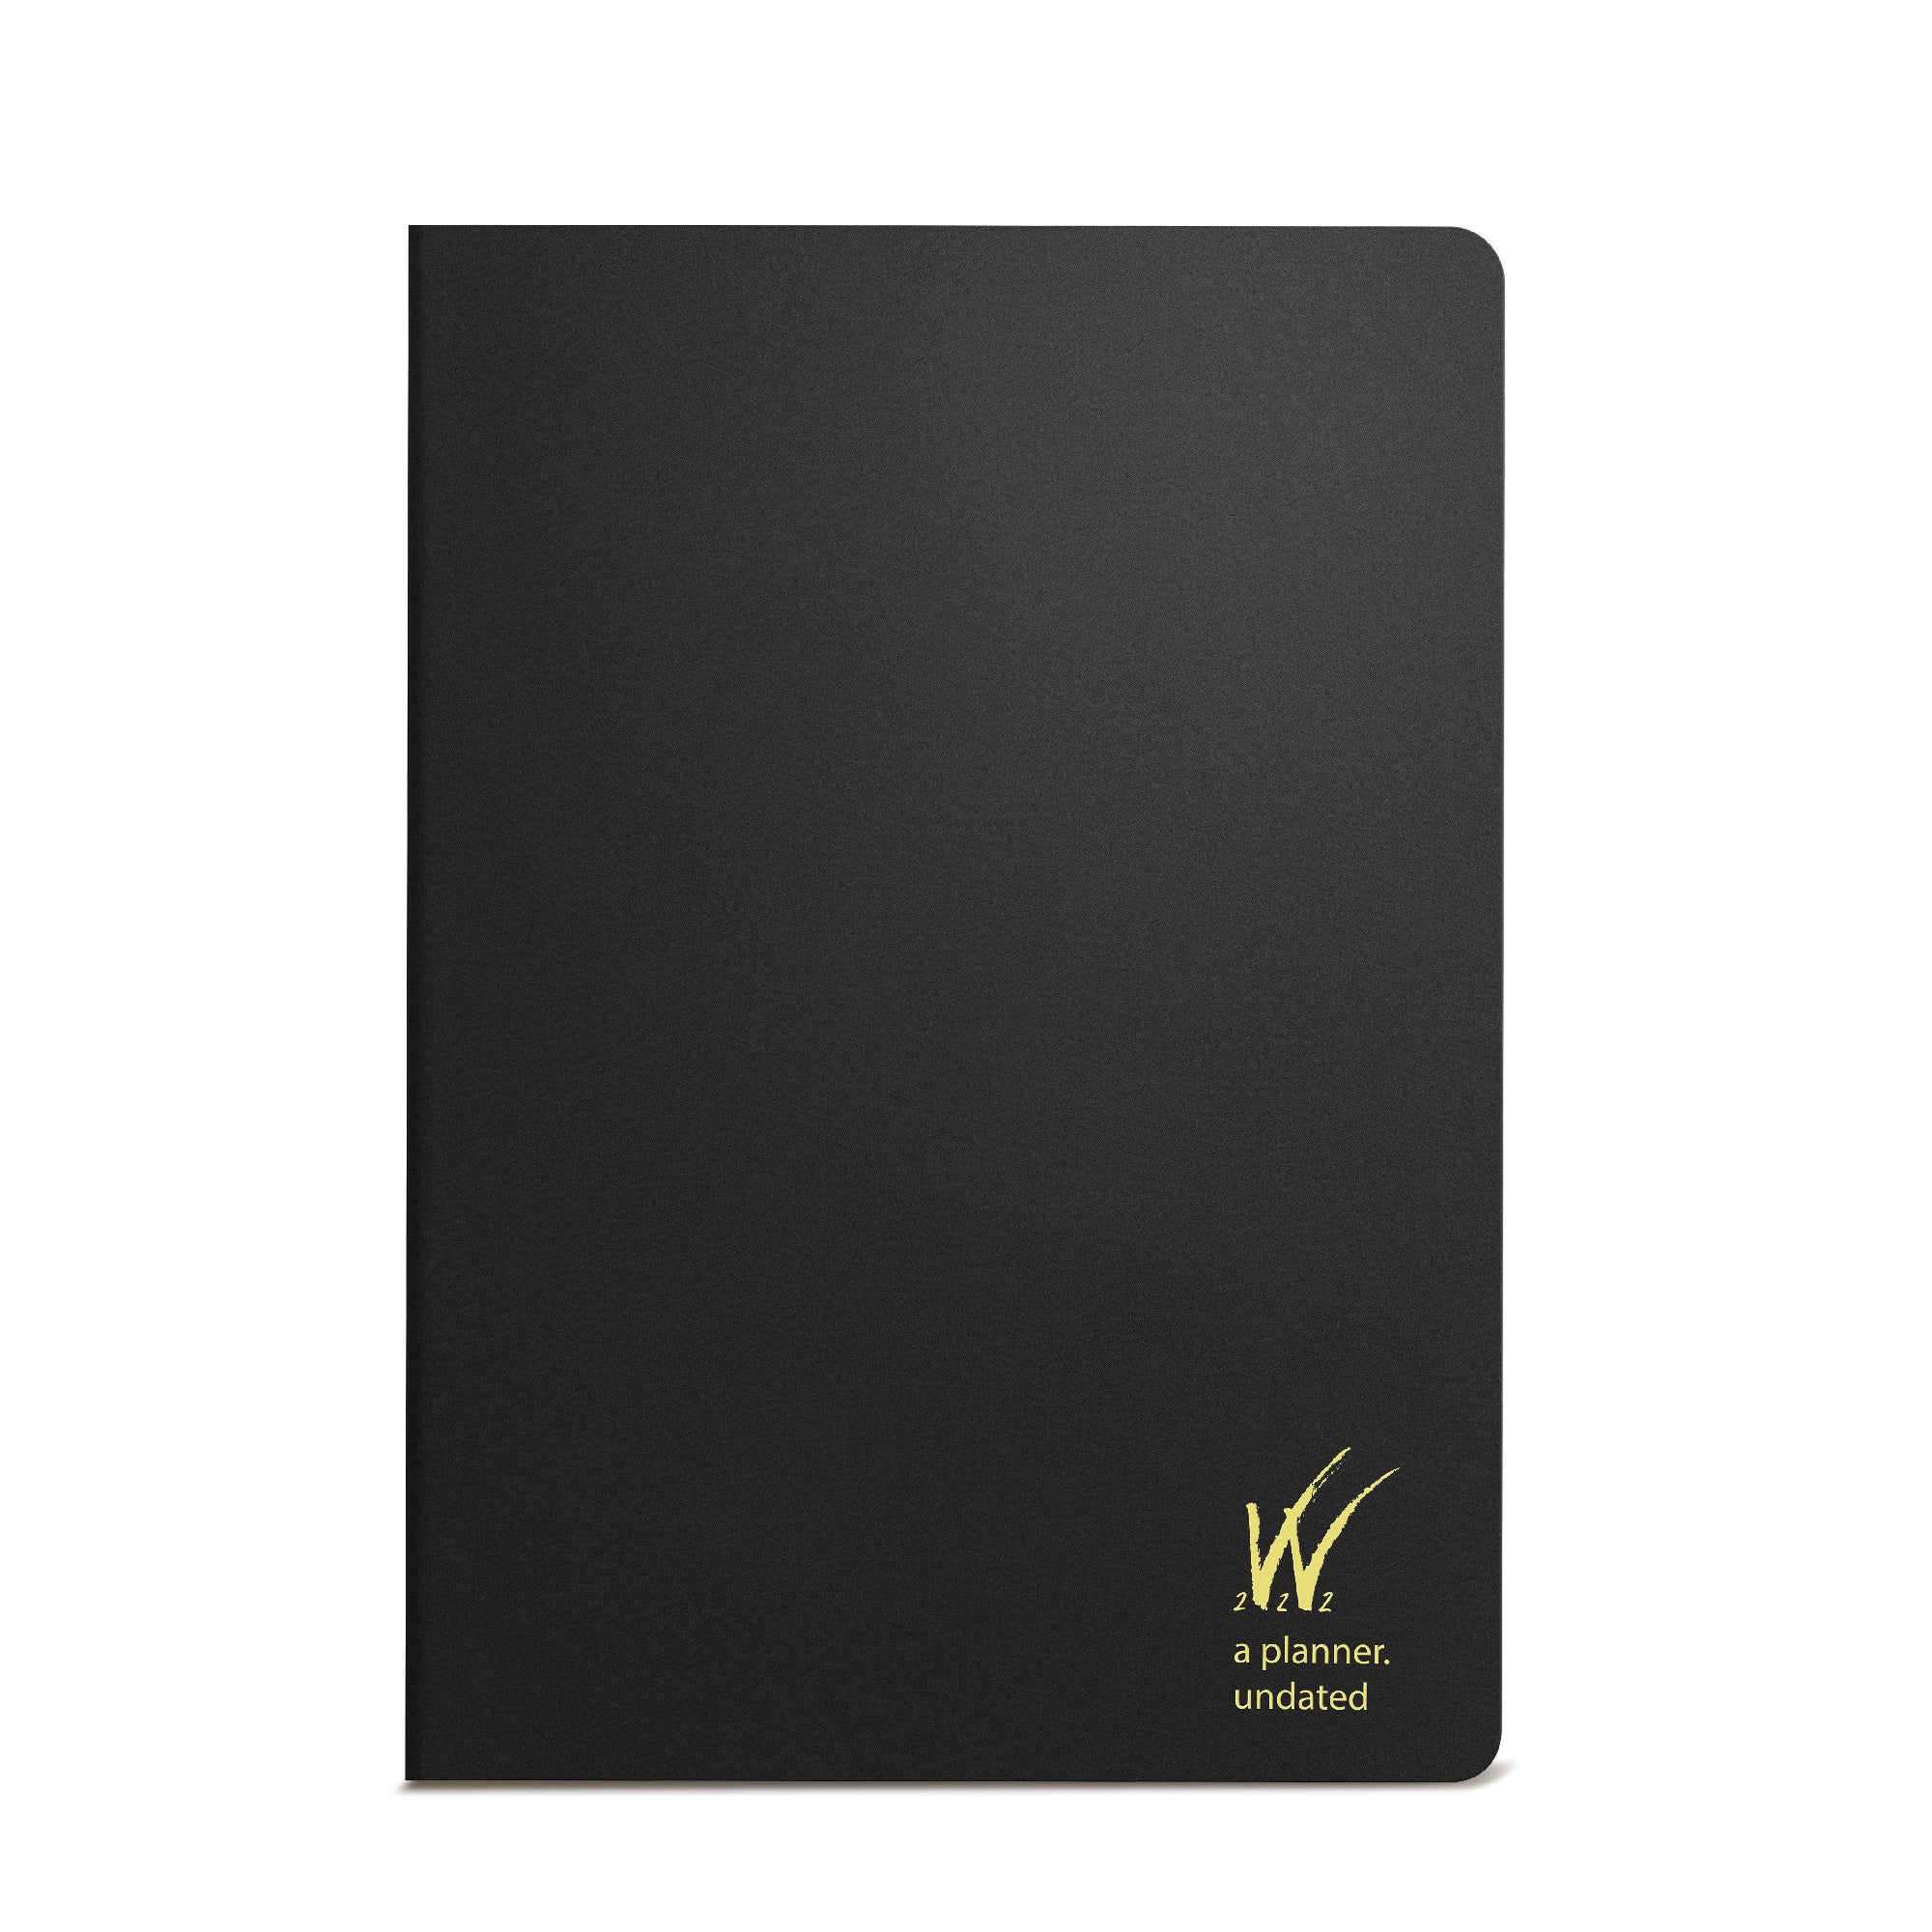 Overstock Sale! - A5 2022 Weekly Planner - 52gsm Tomoe River Paper